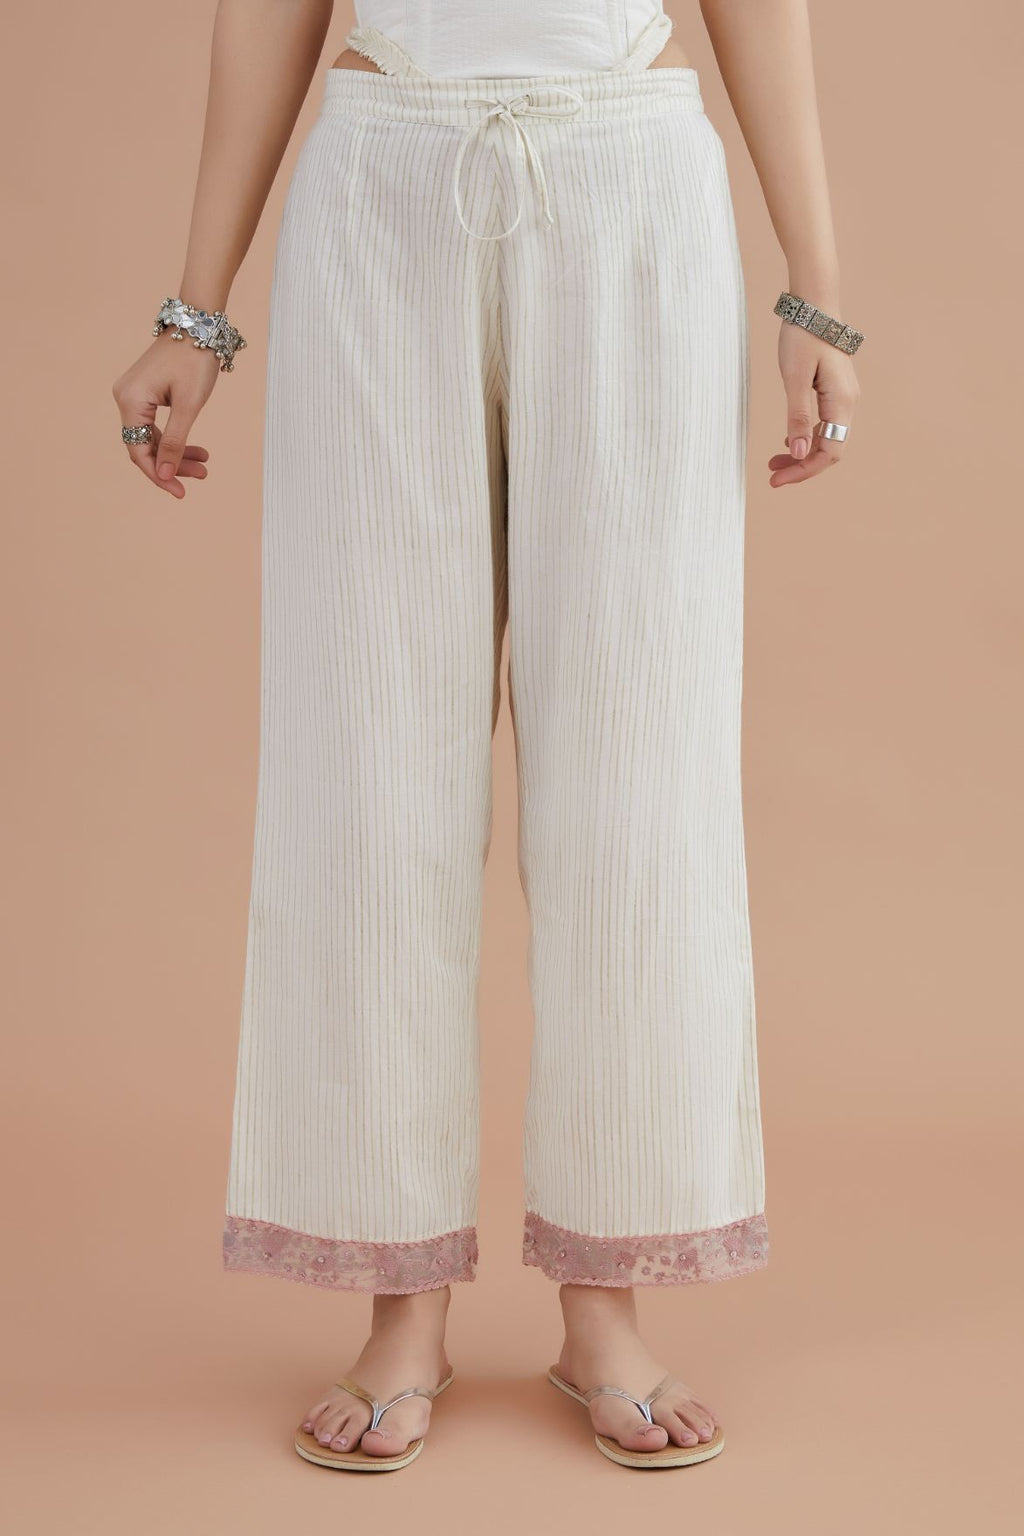 Off white straight pants detailed with pink embroidery at bottom.